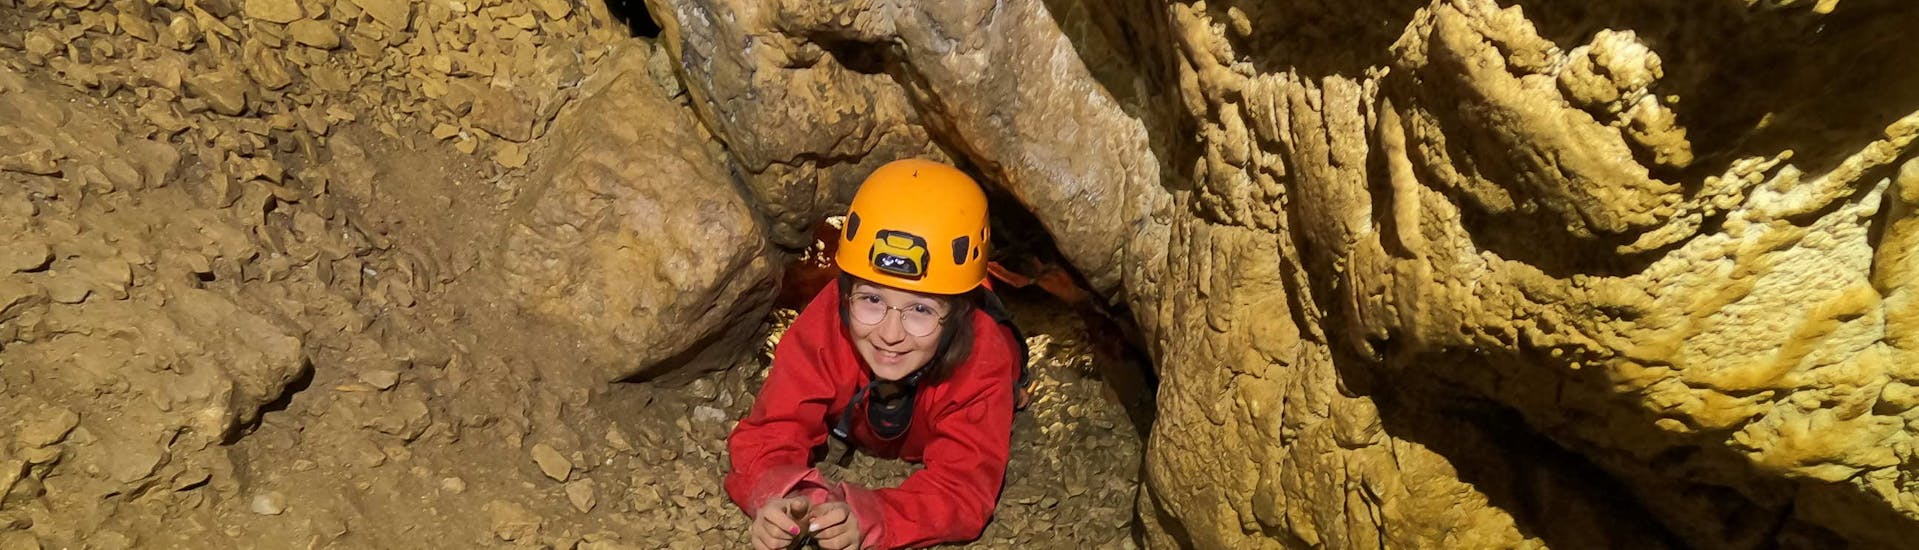 Caving in Remène.